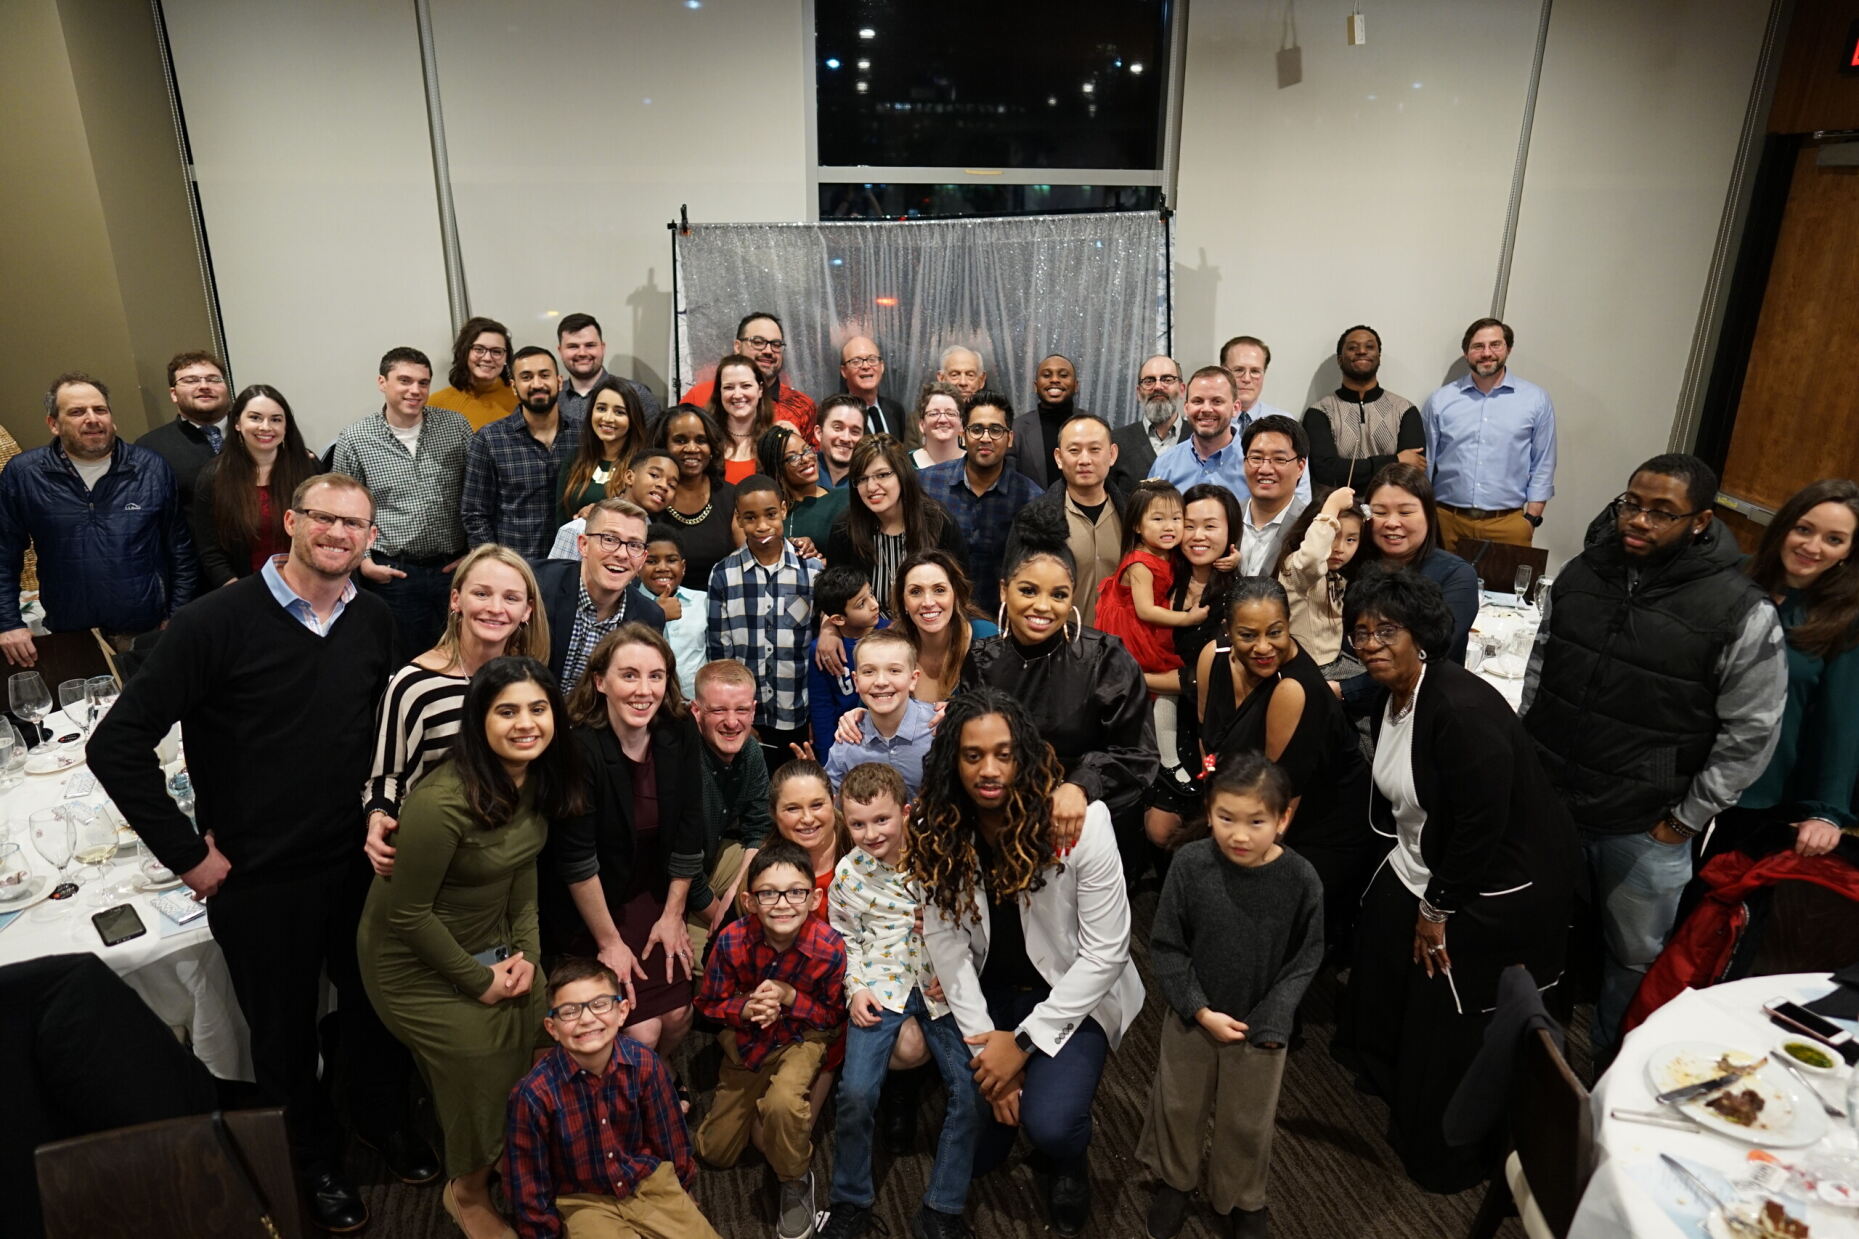 Picture of FedWriters leadership, employees, and family celebrating together at a holiday party.